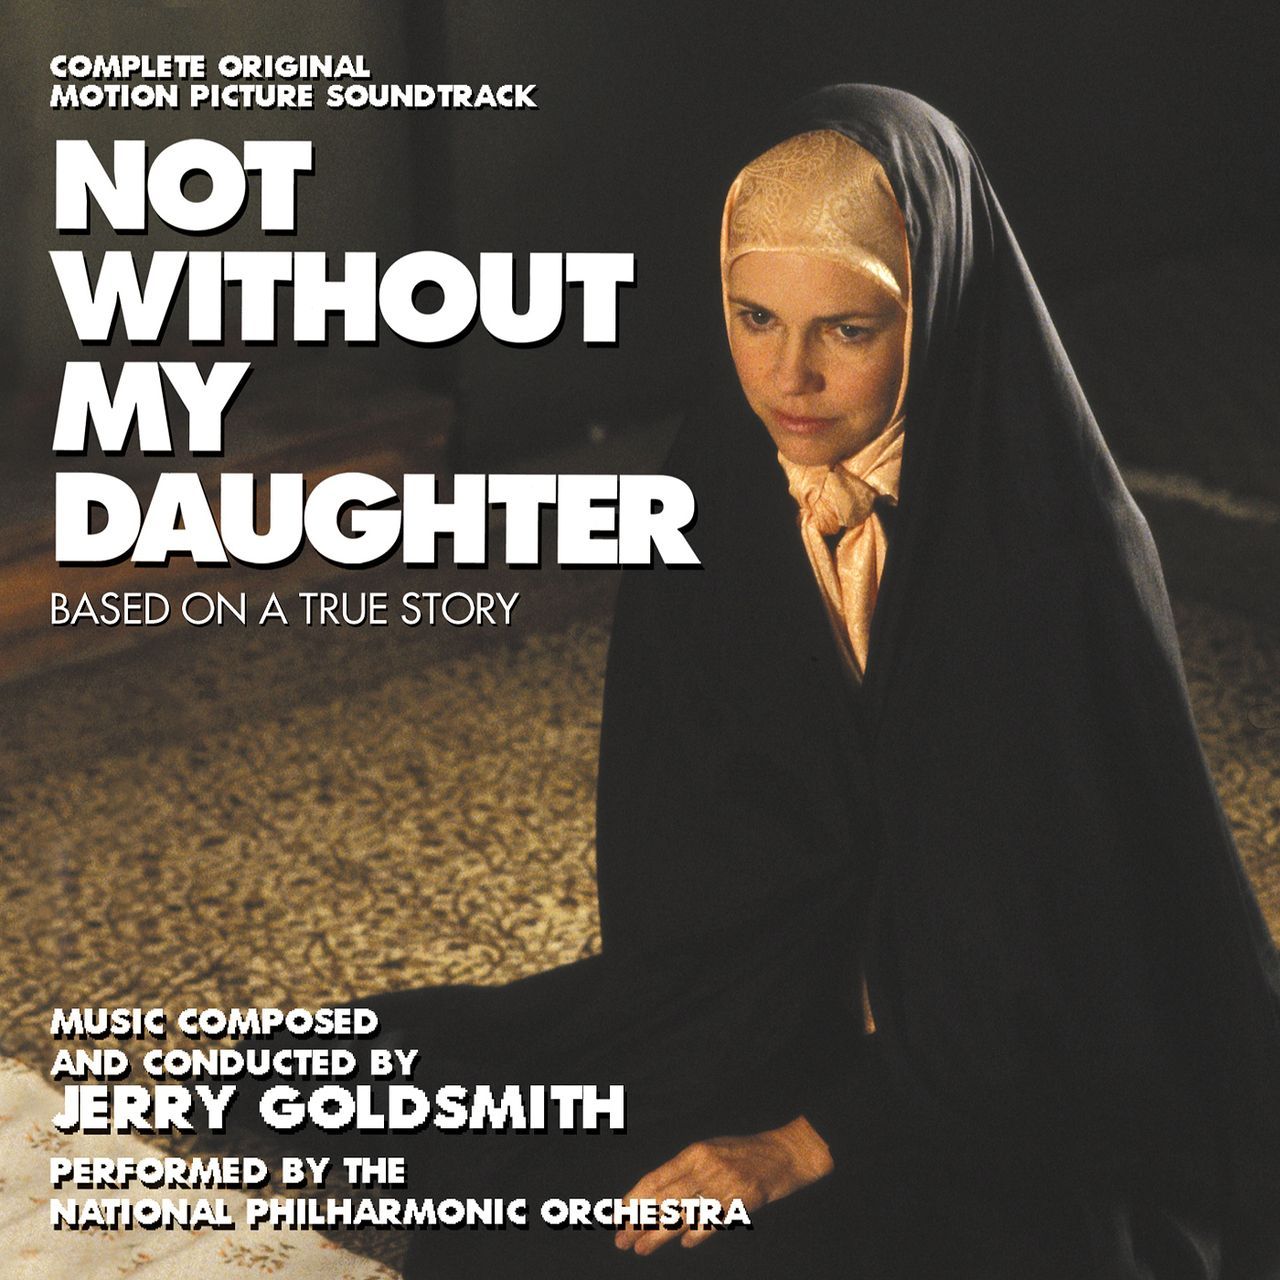 Not Without My Daughter album art